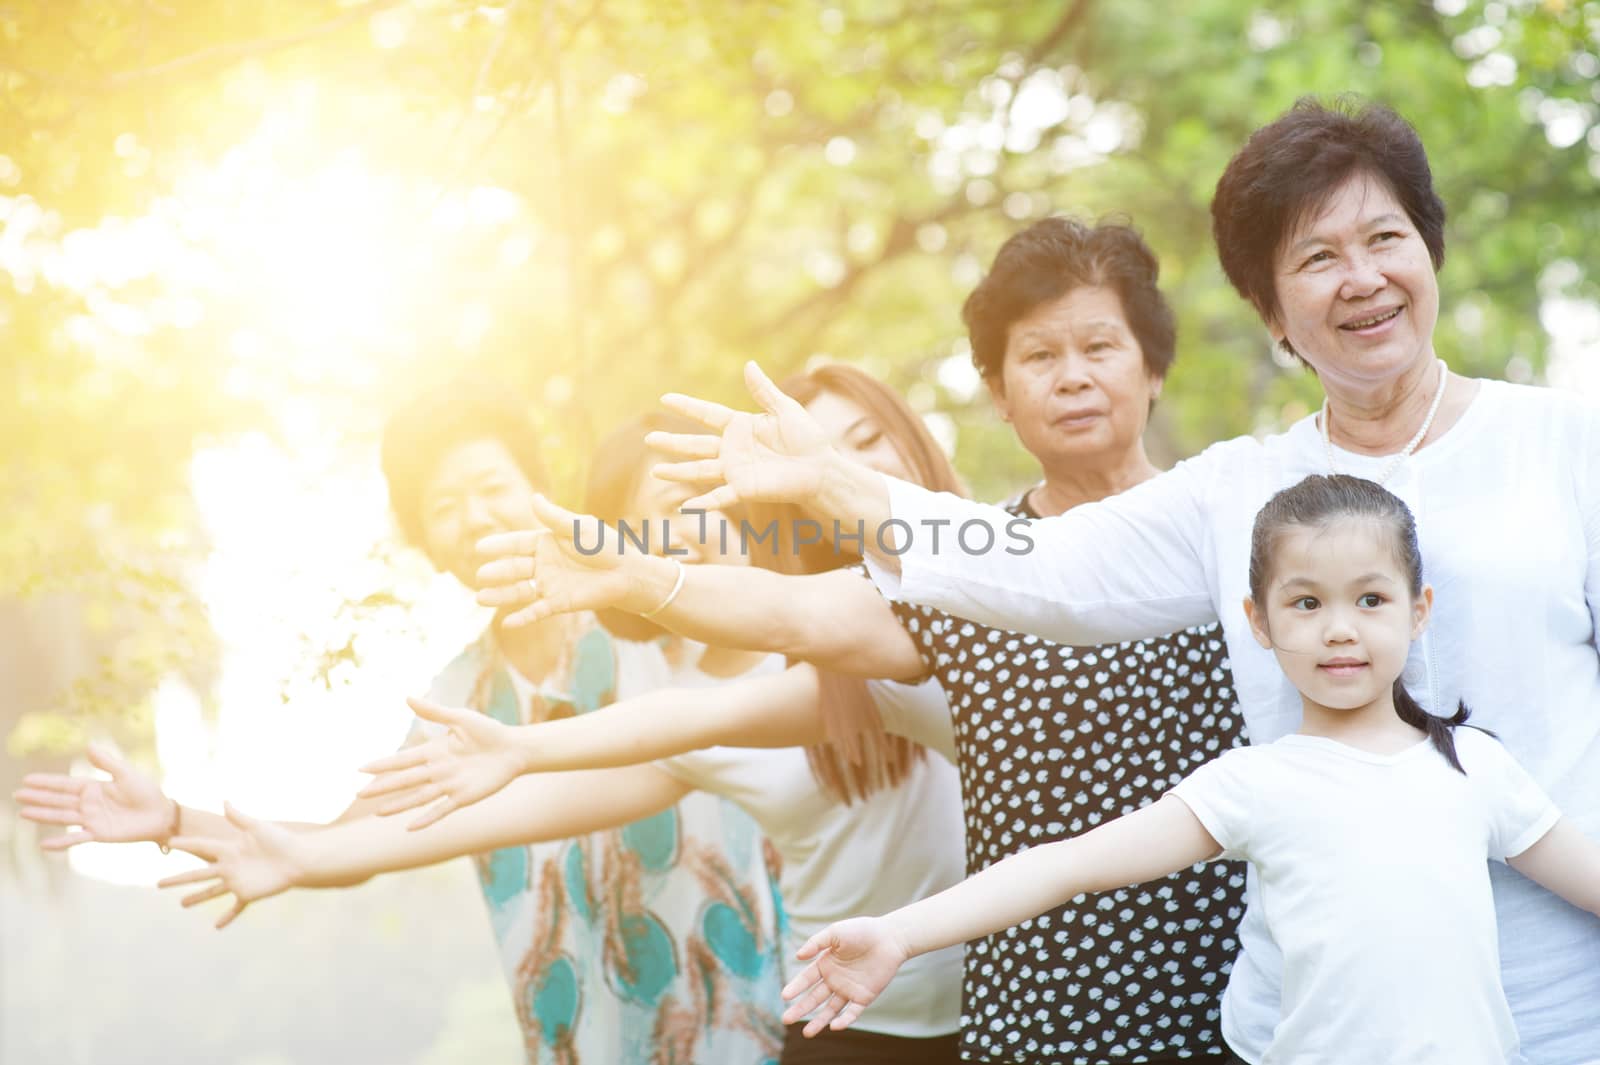 Big group of cheerful Asian multi generations family playing at park, grandparent, parent and children, outdoor nature park in morning with sun flare.